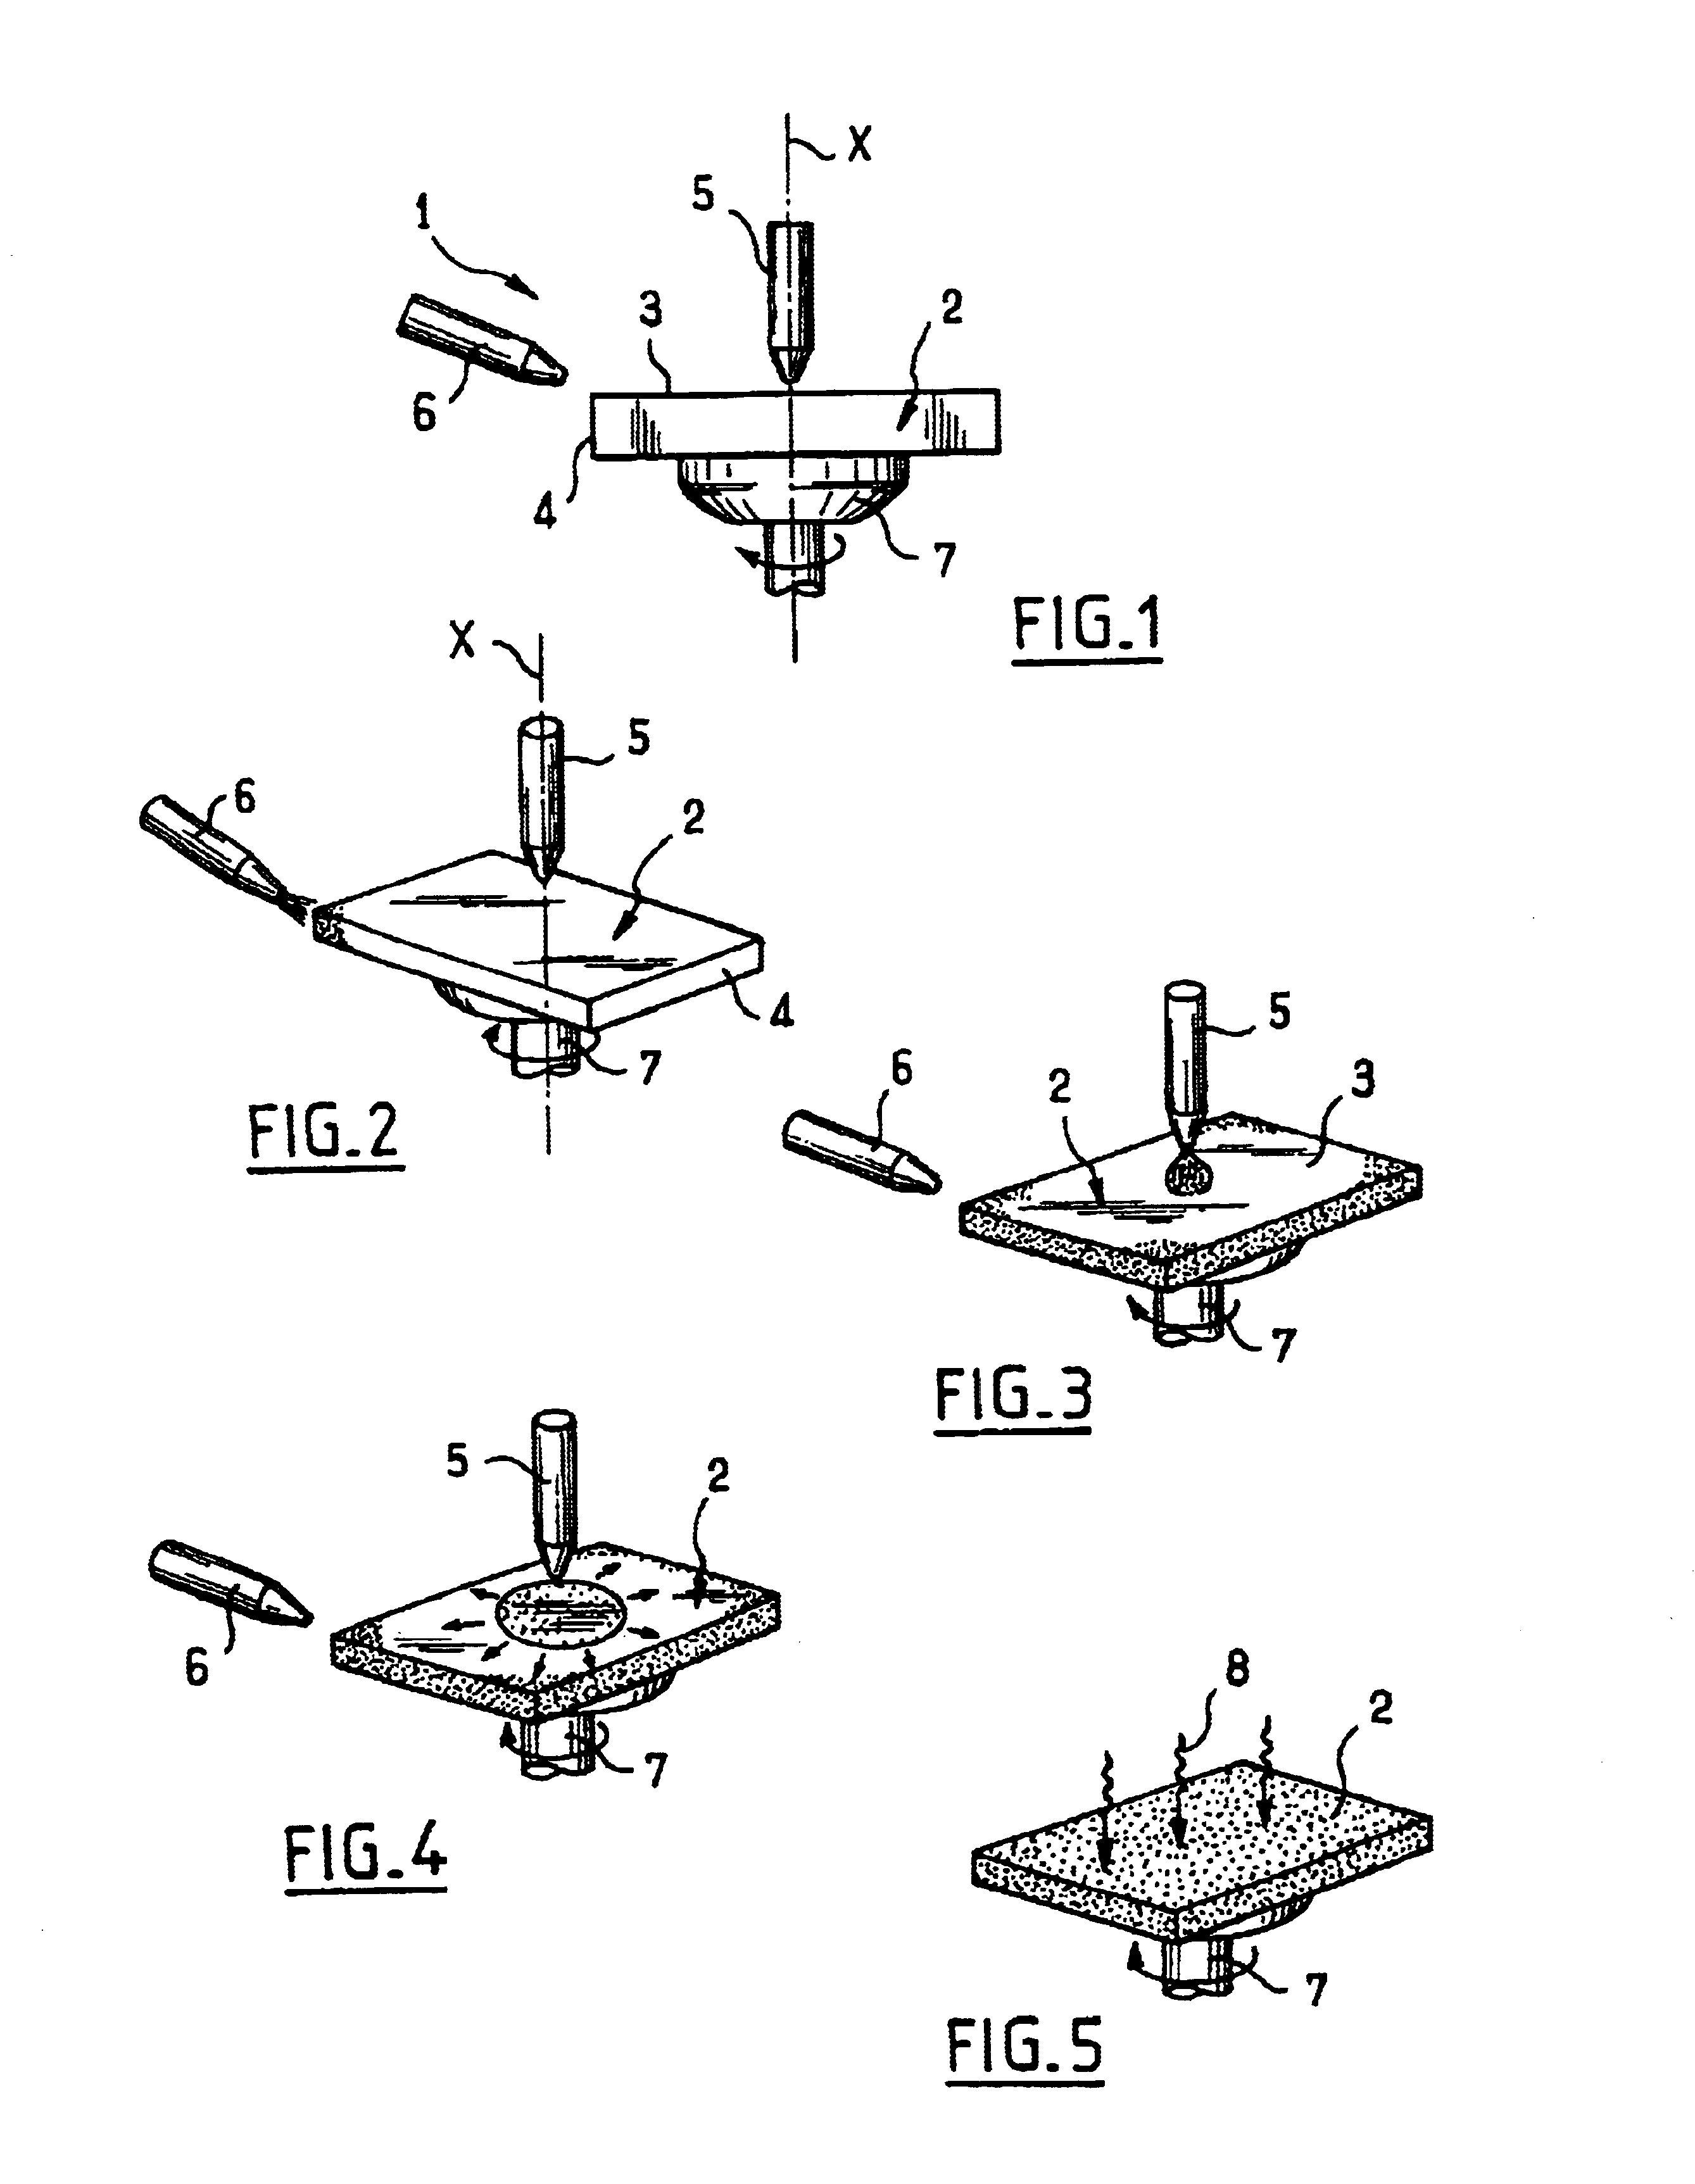 Method and apparatus for applying a coating such as a paint or a varnish